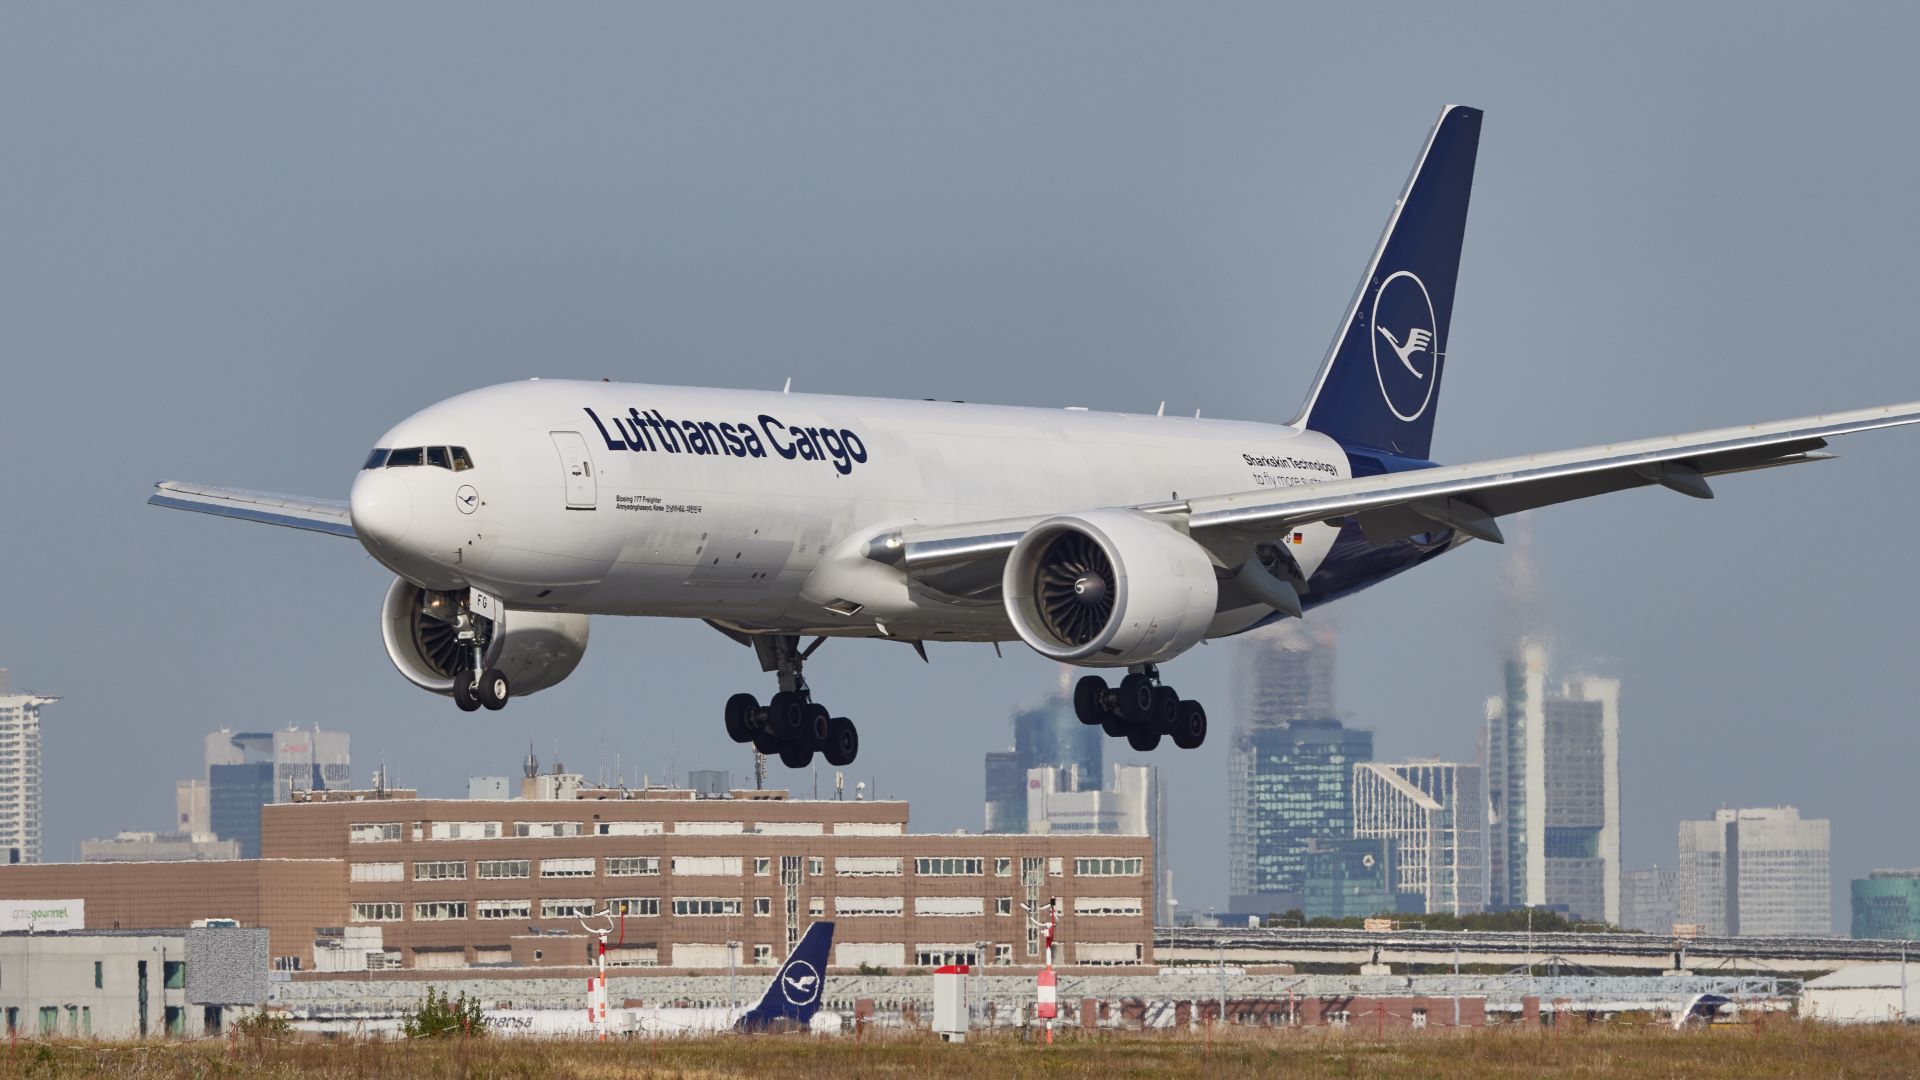 Lufthansa Cargo profits wiped out in Q3 - FreightWaves